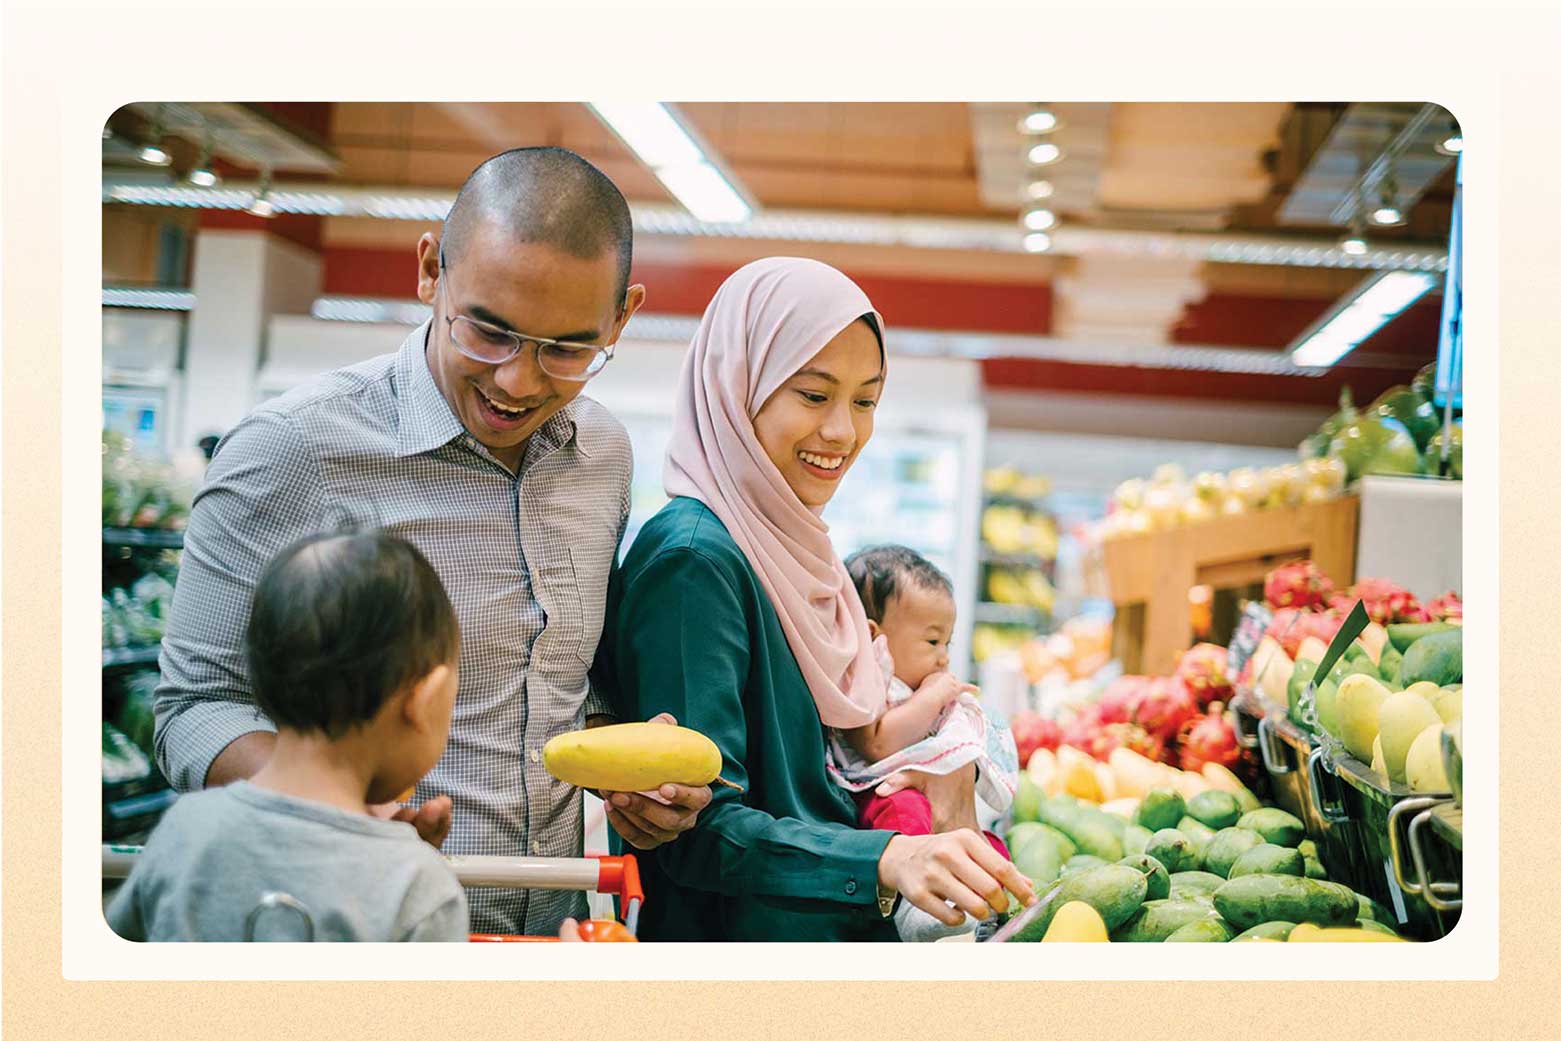 Smiling woman in head scarf with man and two children while grocery shopping in the produce section